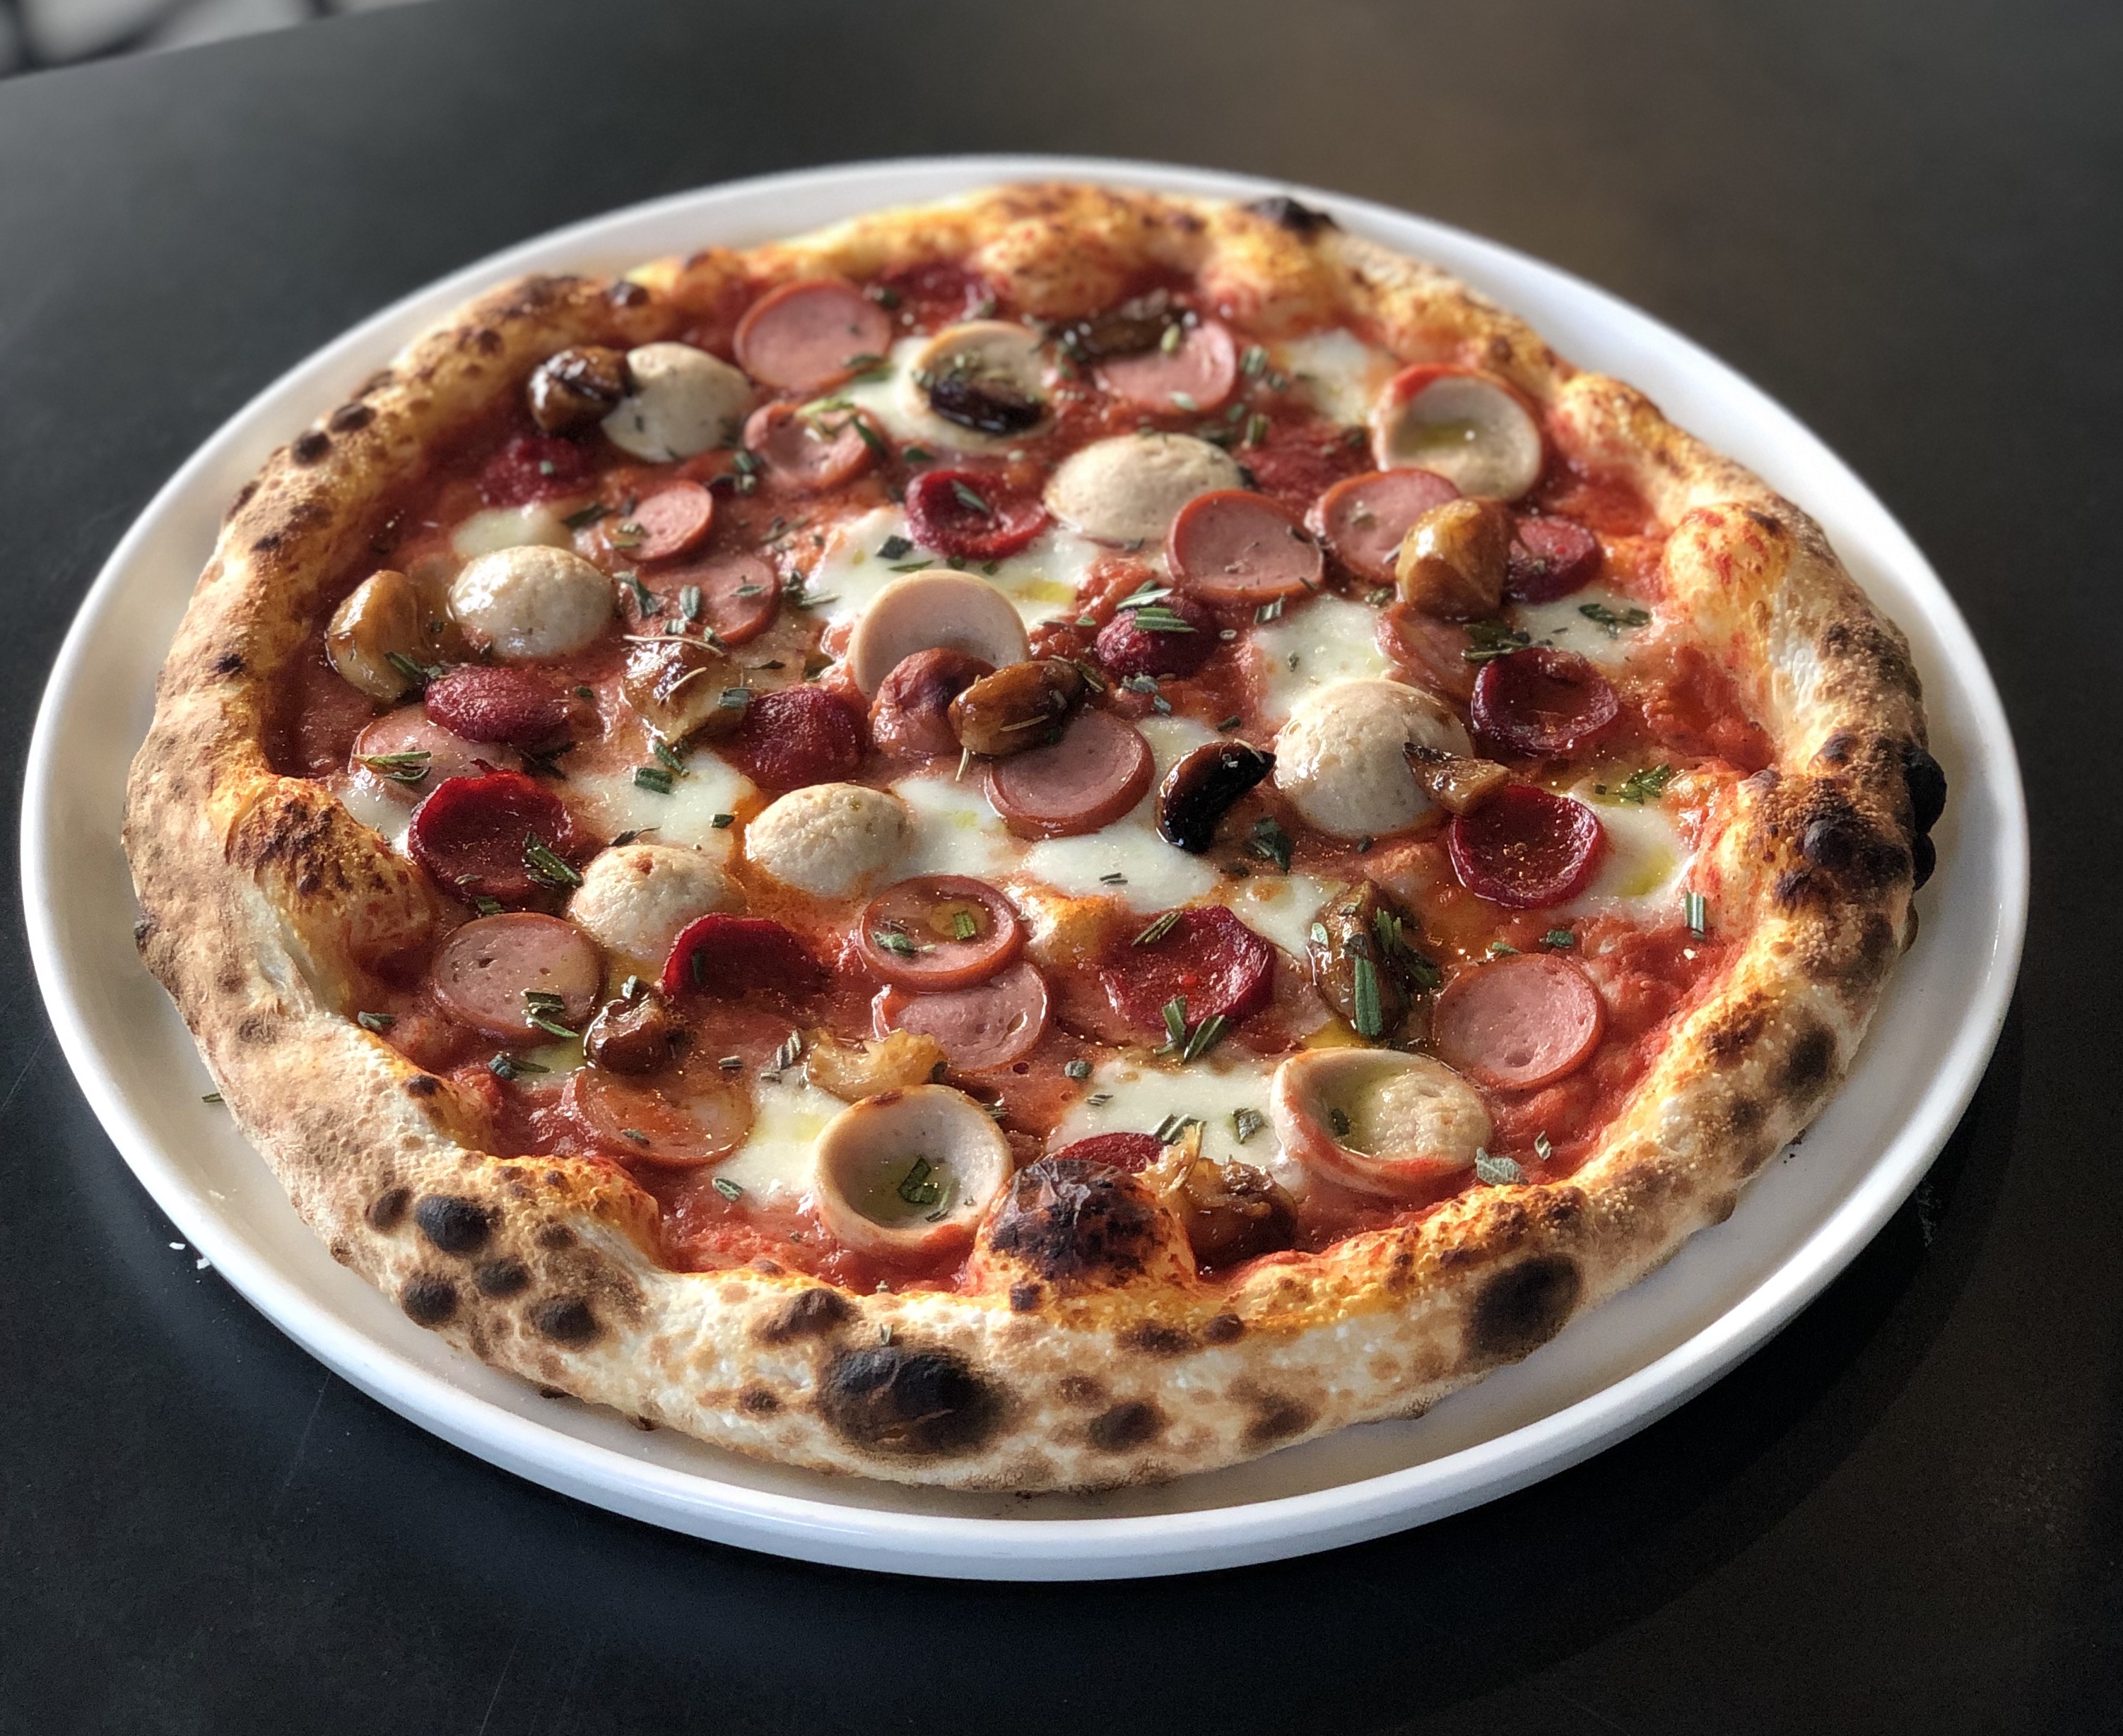 November's Special - The Sausage Pizza